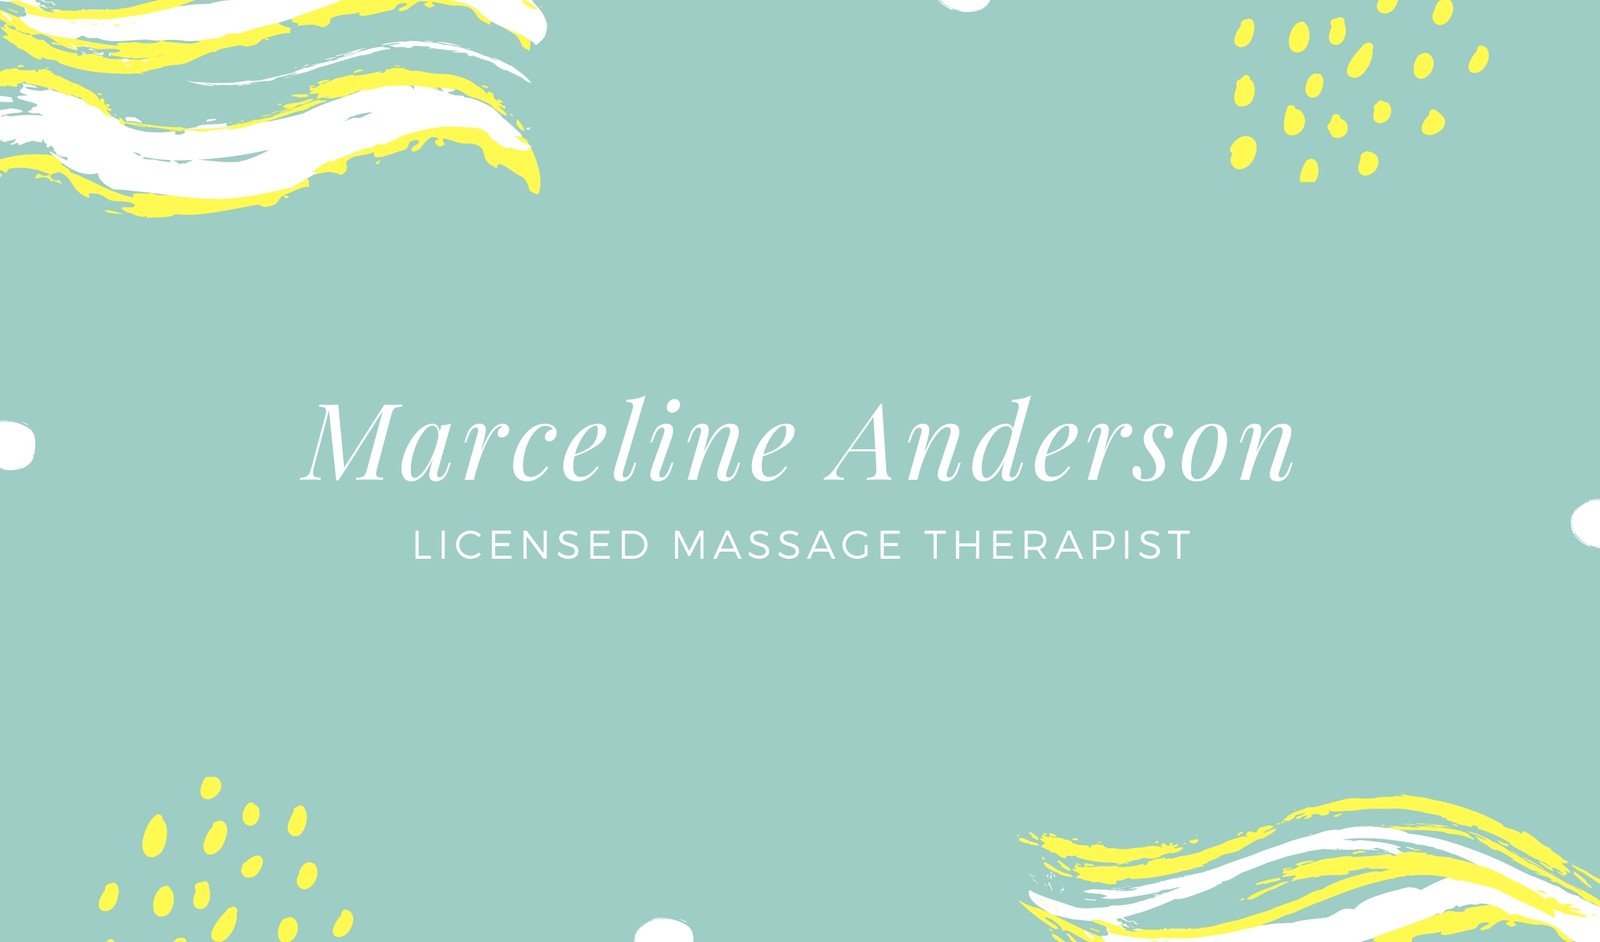 Free printable massage therapist business card templates  Canva Intended For Massage Therapy Business Card Templates